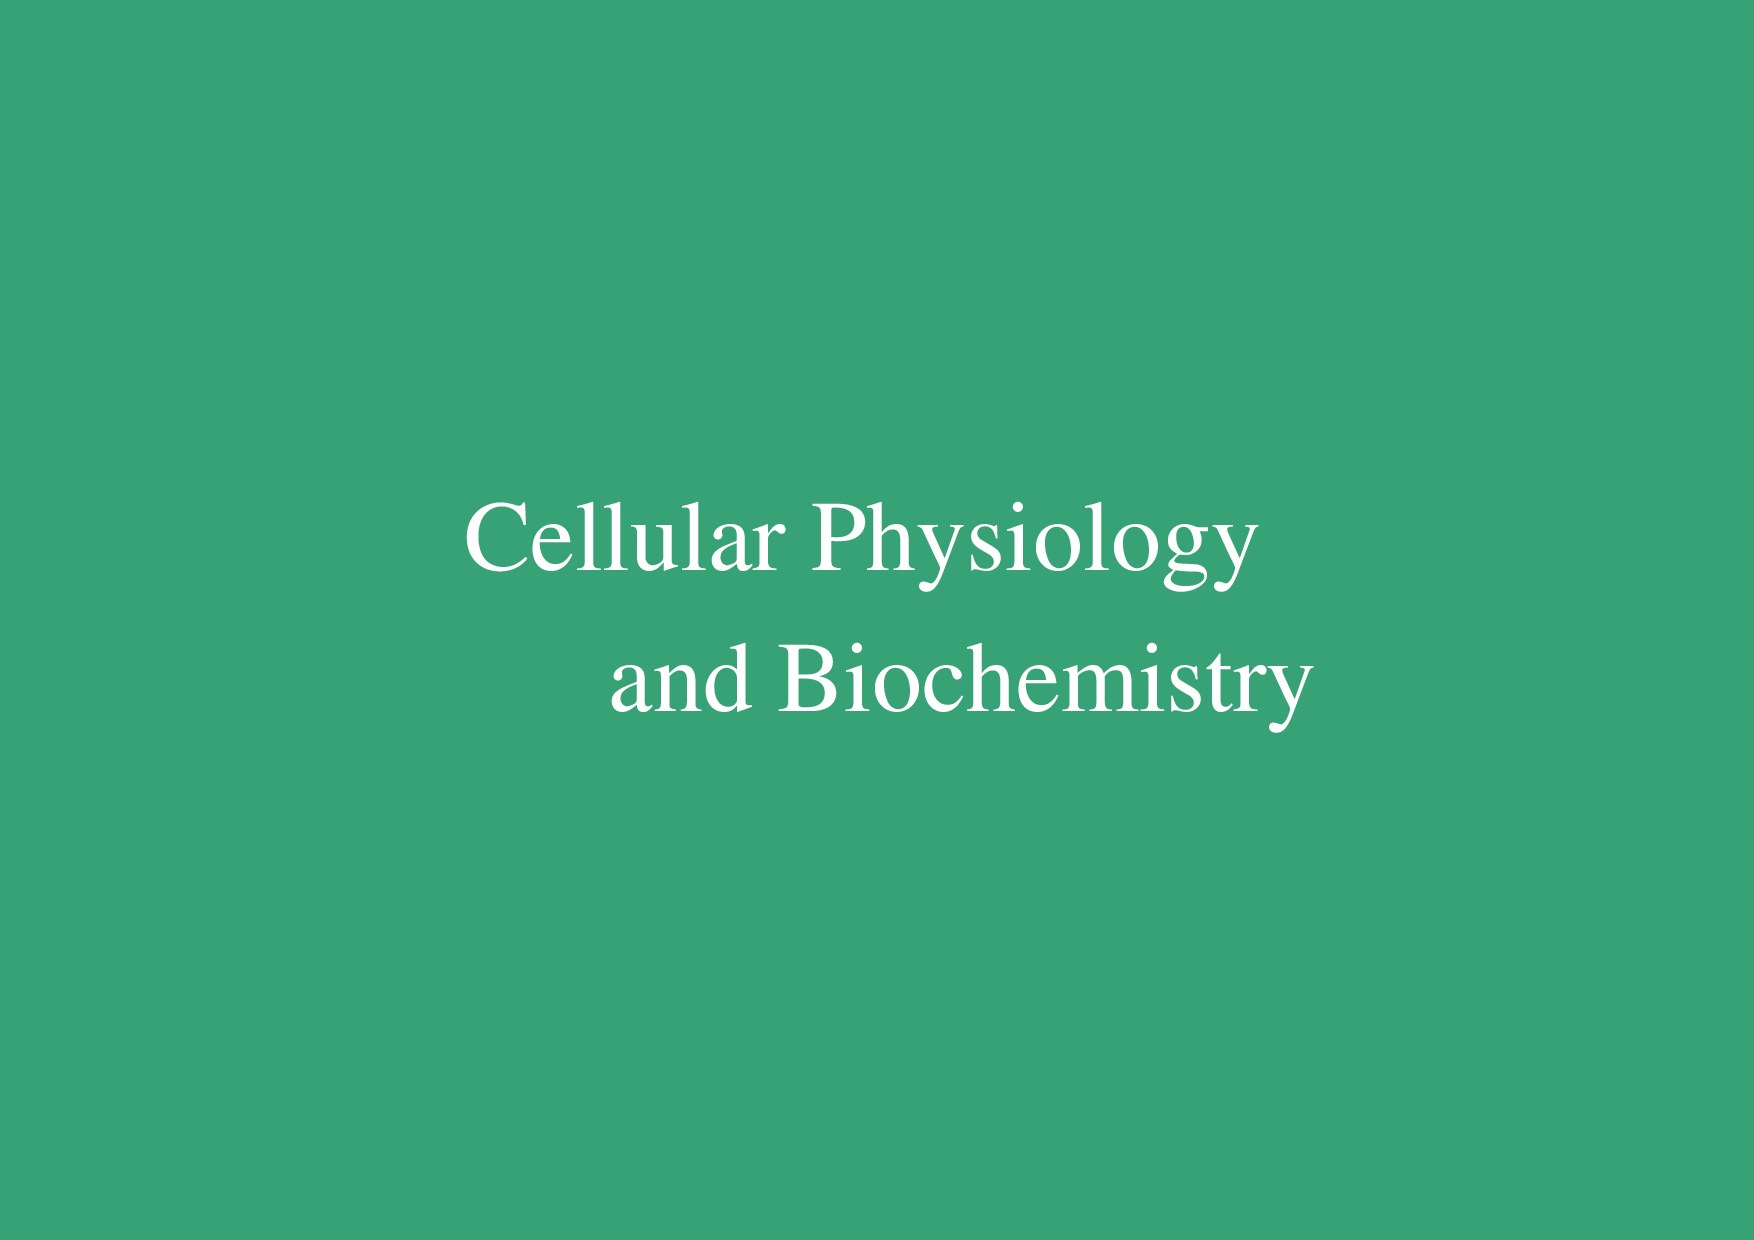 Cellular Physiology and Biochemistry is a multidisciplinary scientific forum dedicated to advancing the frontiers of basic cellular research.